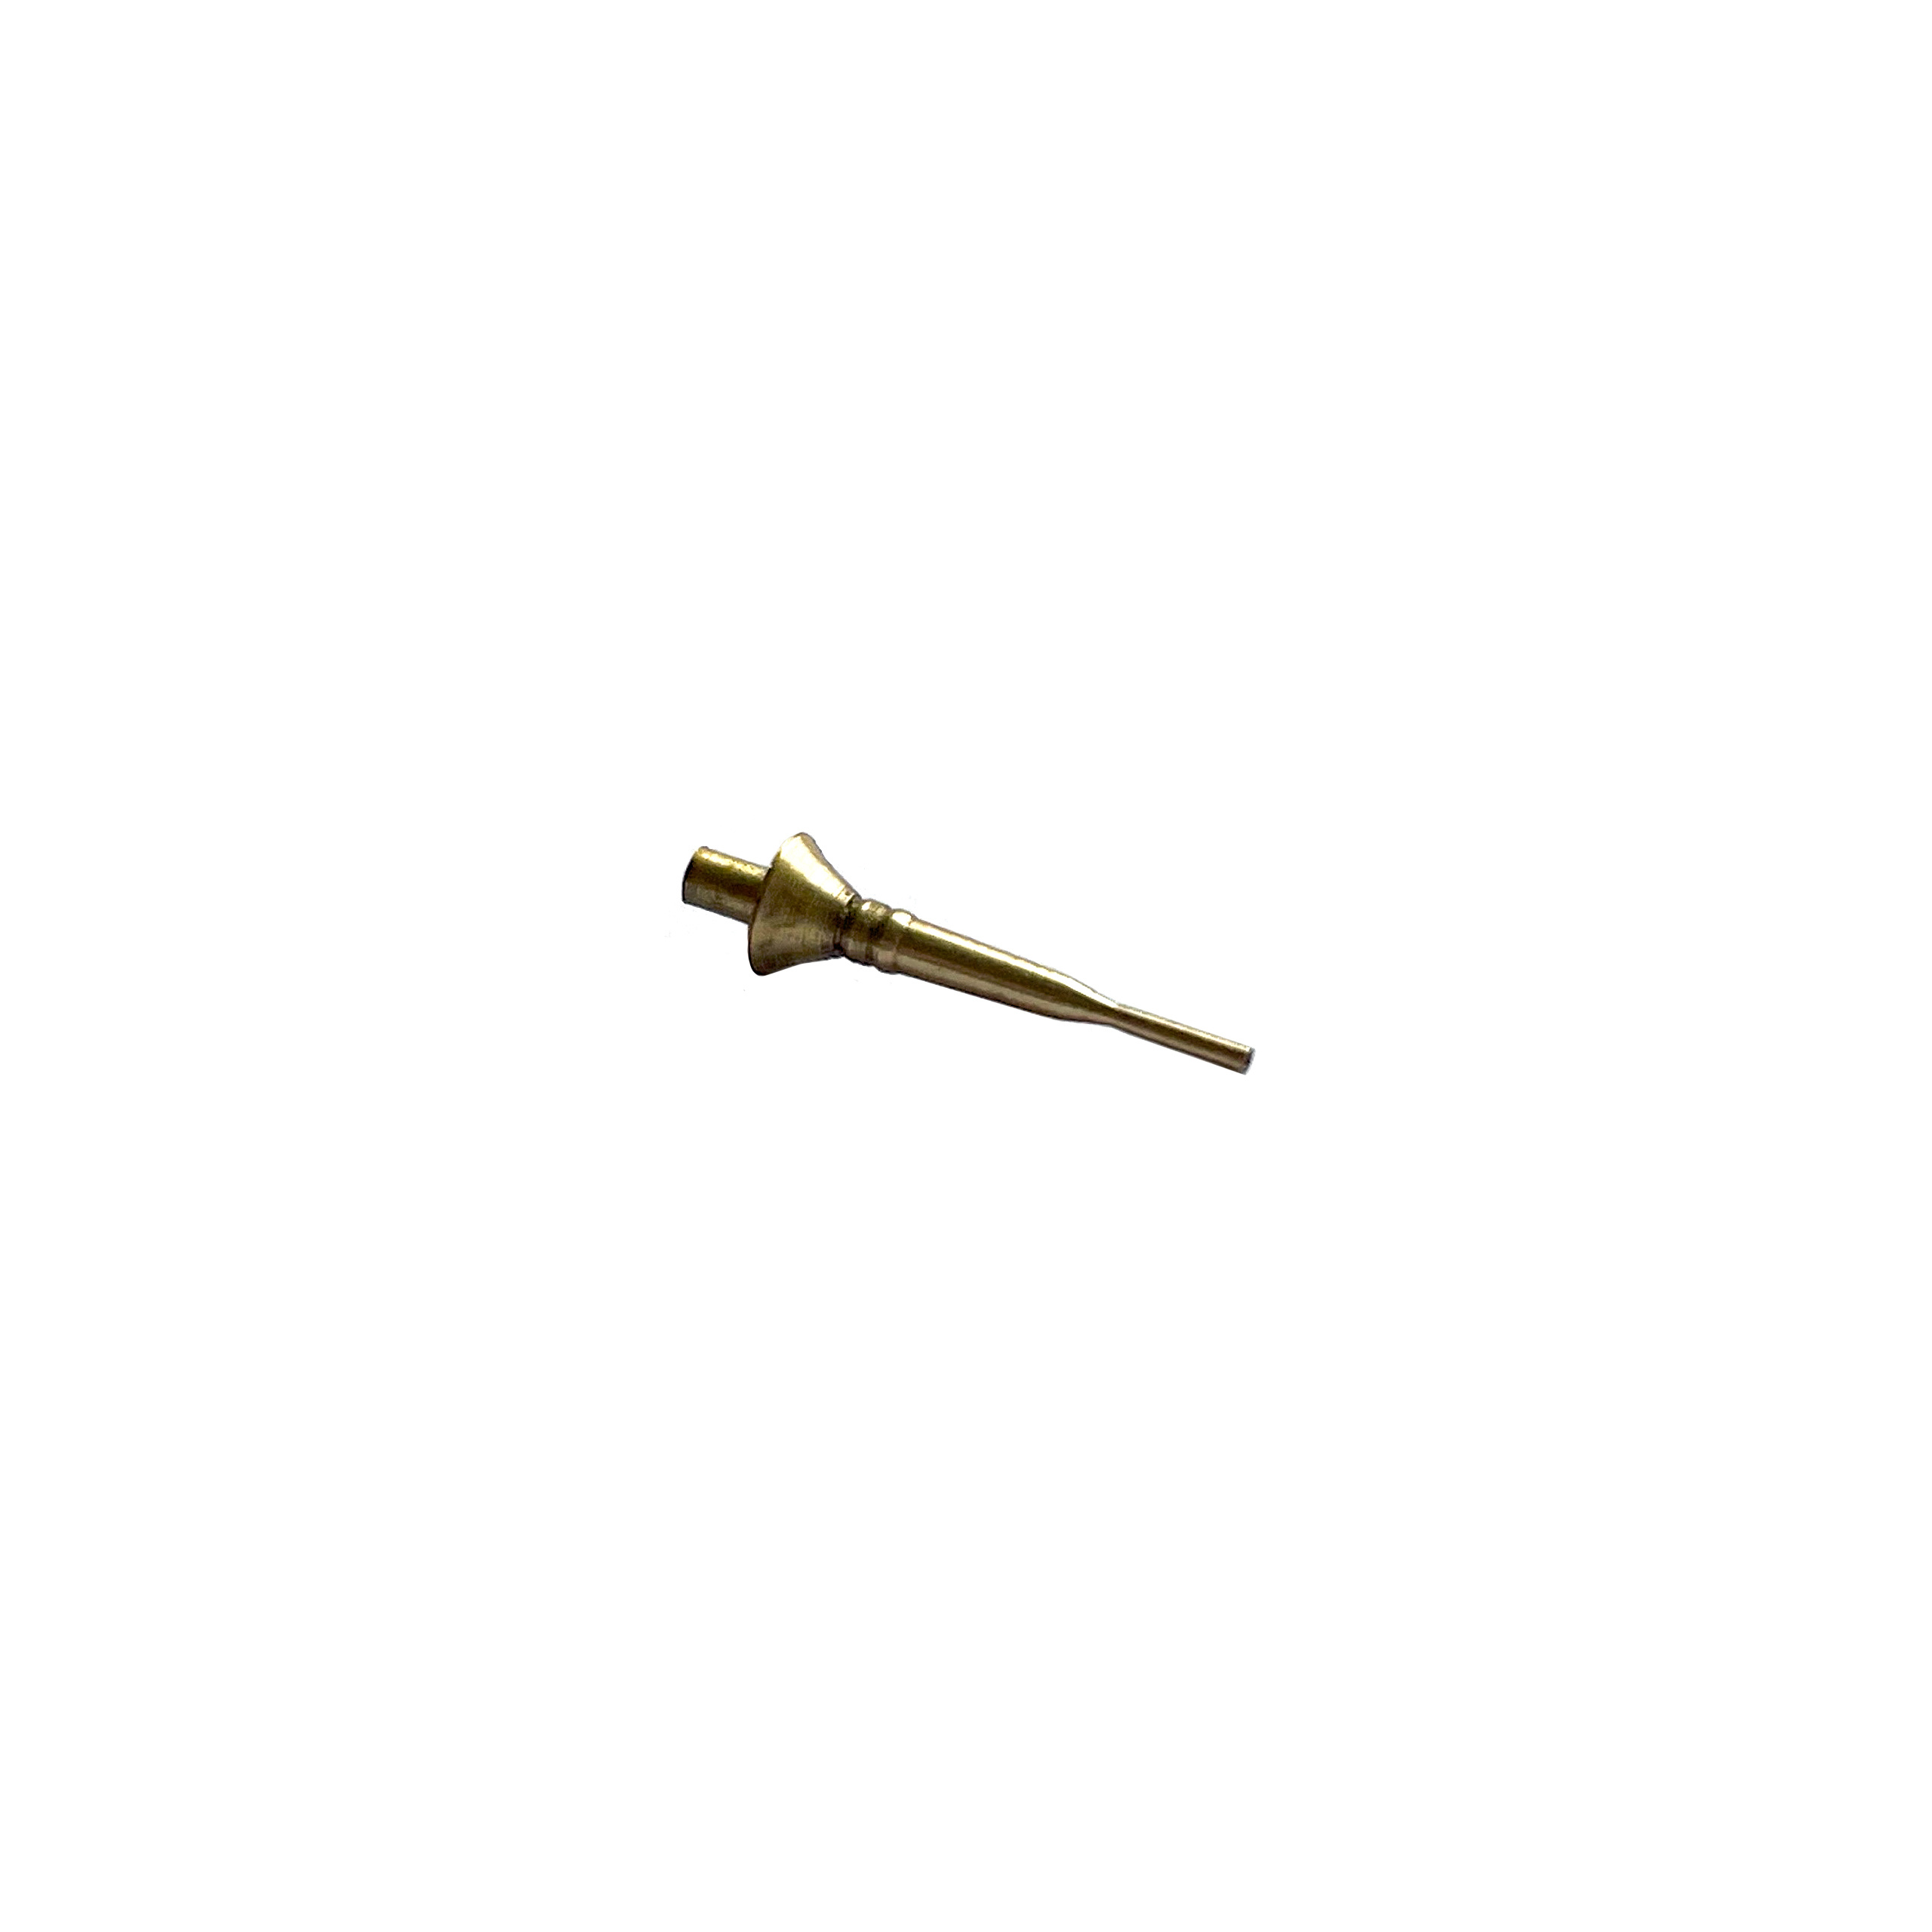 D35007 Zedval 1/35 Antenna input for AFV equipped with radios R-123/123М, R-163, R-173